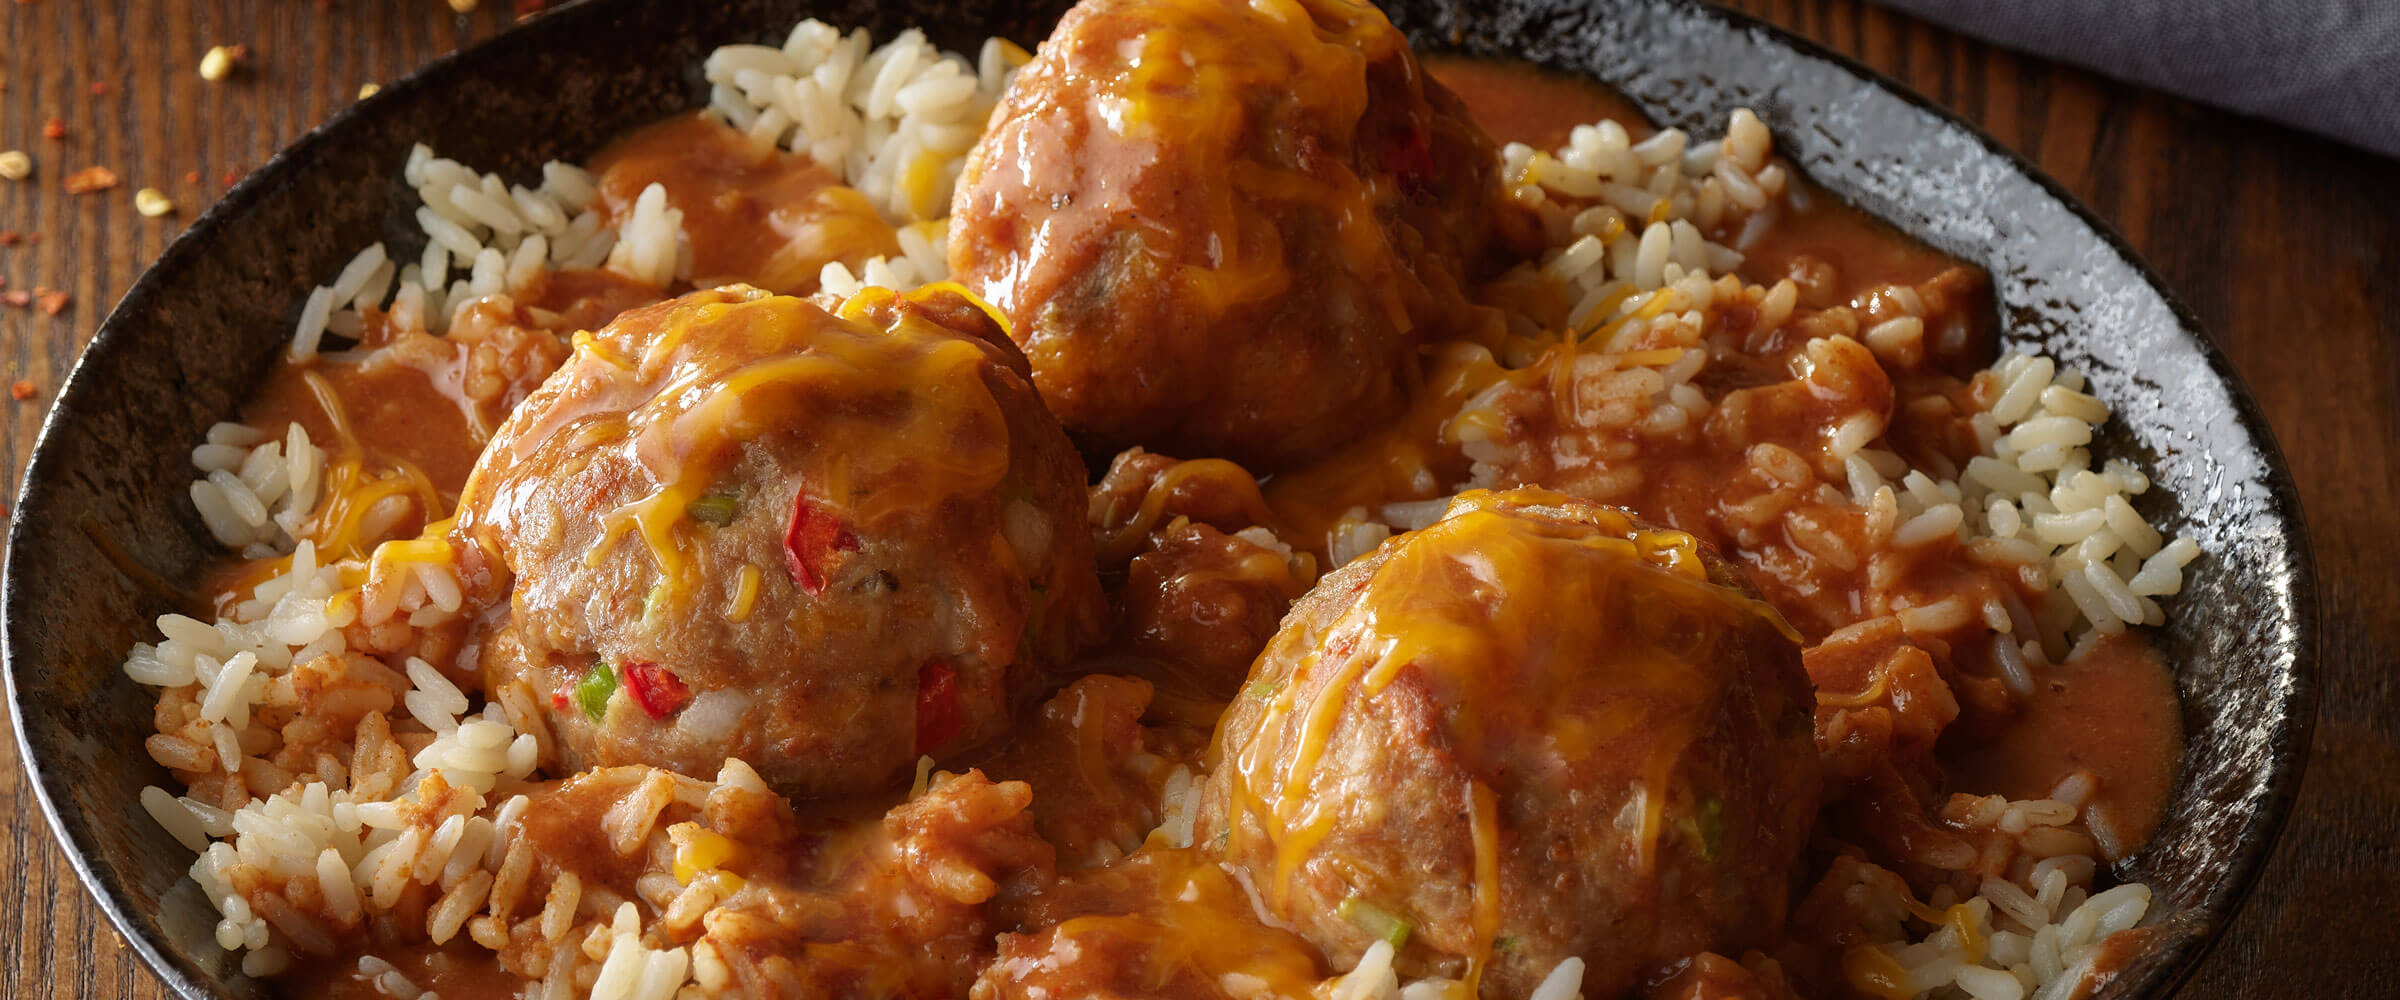 Turkey Meatballs with Tex Mex Gravy in black bowl over rice